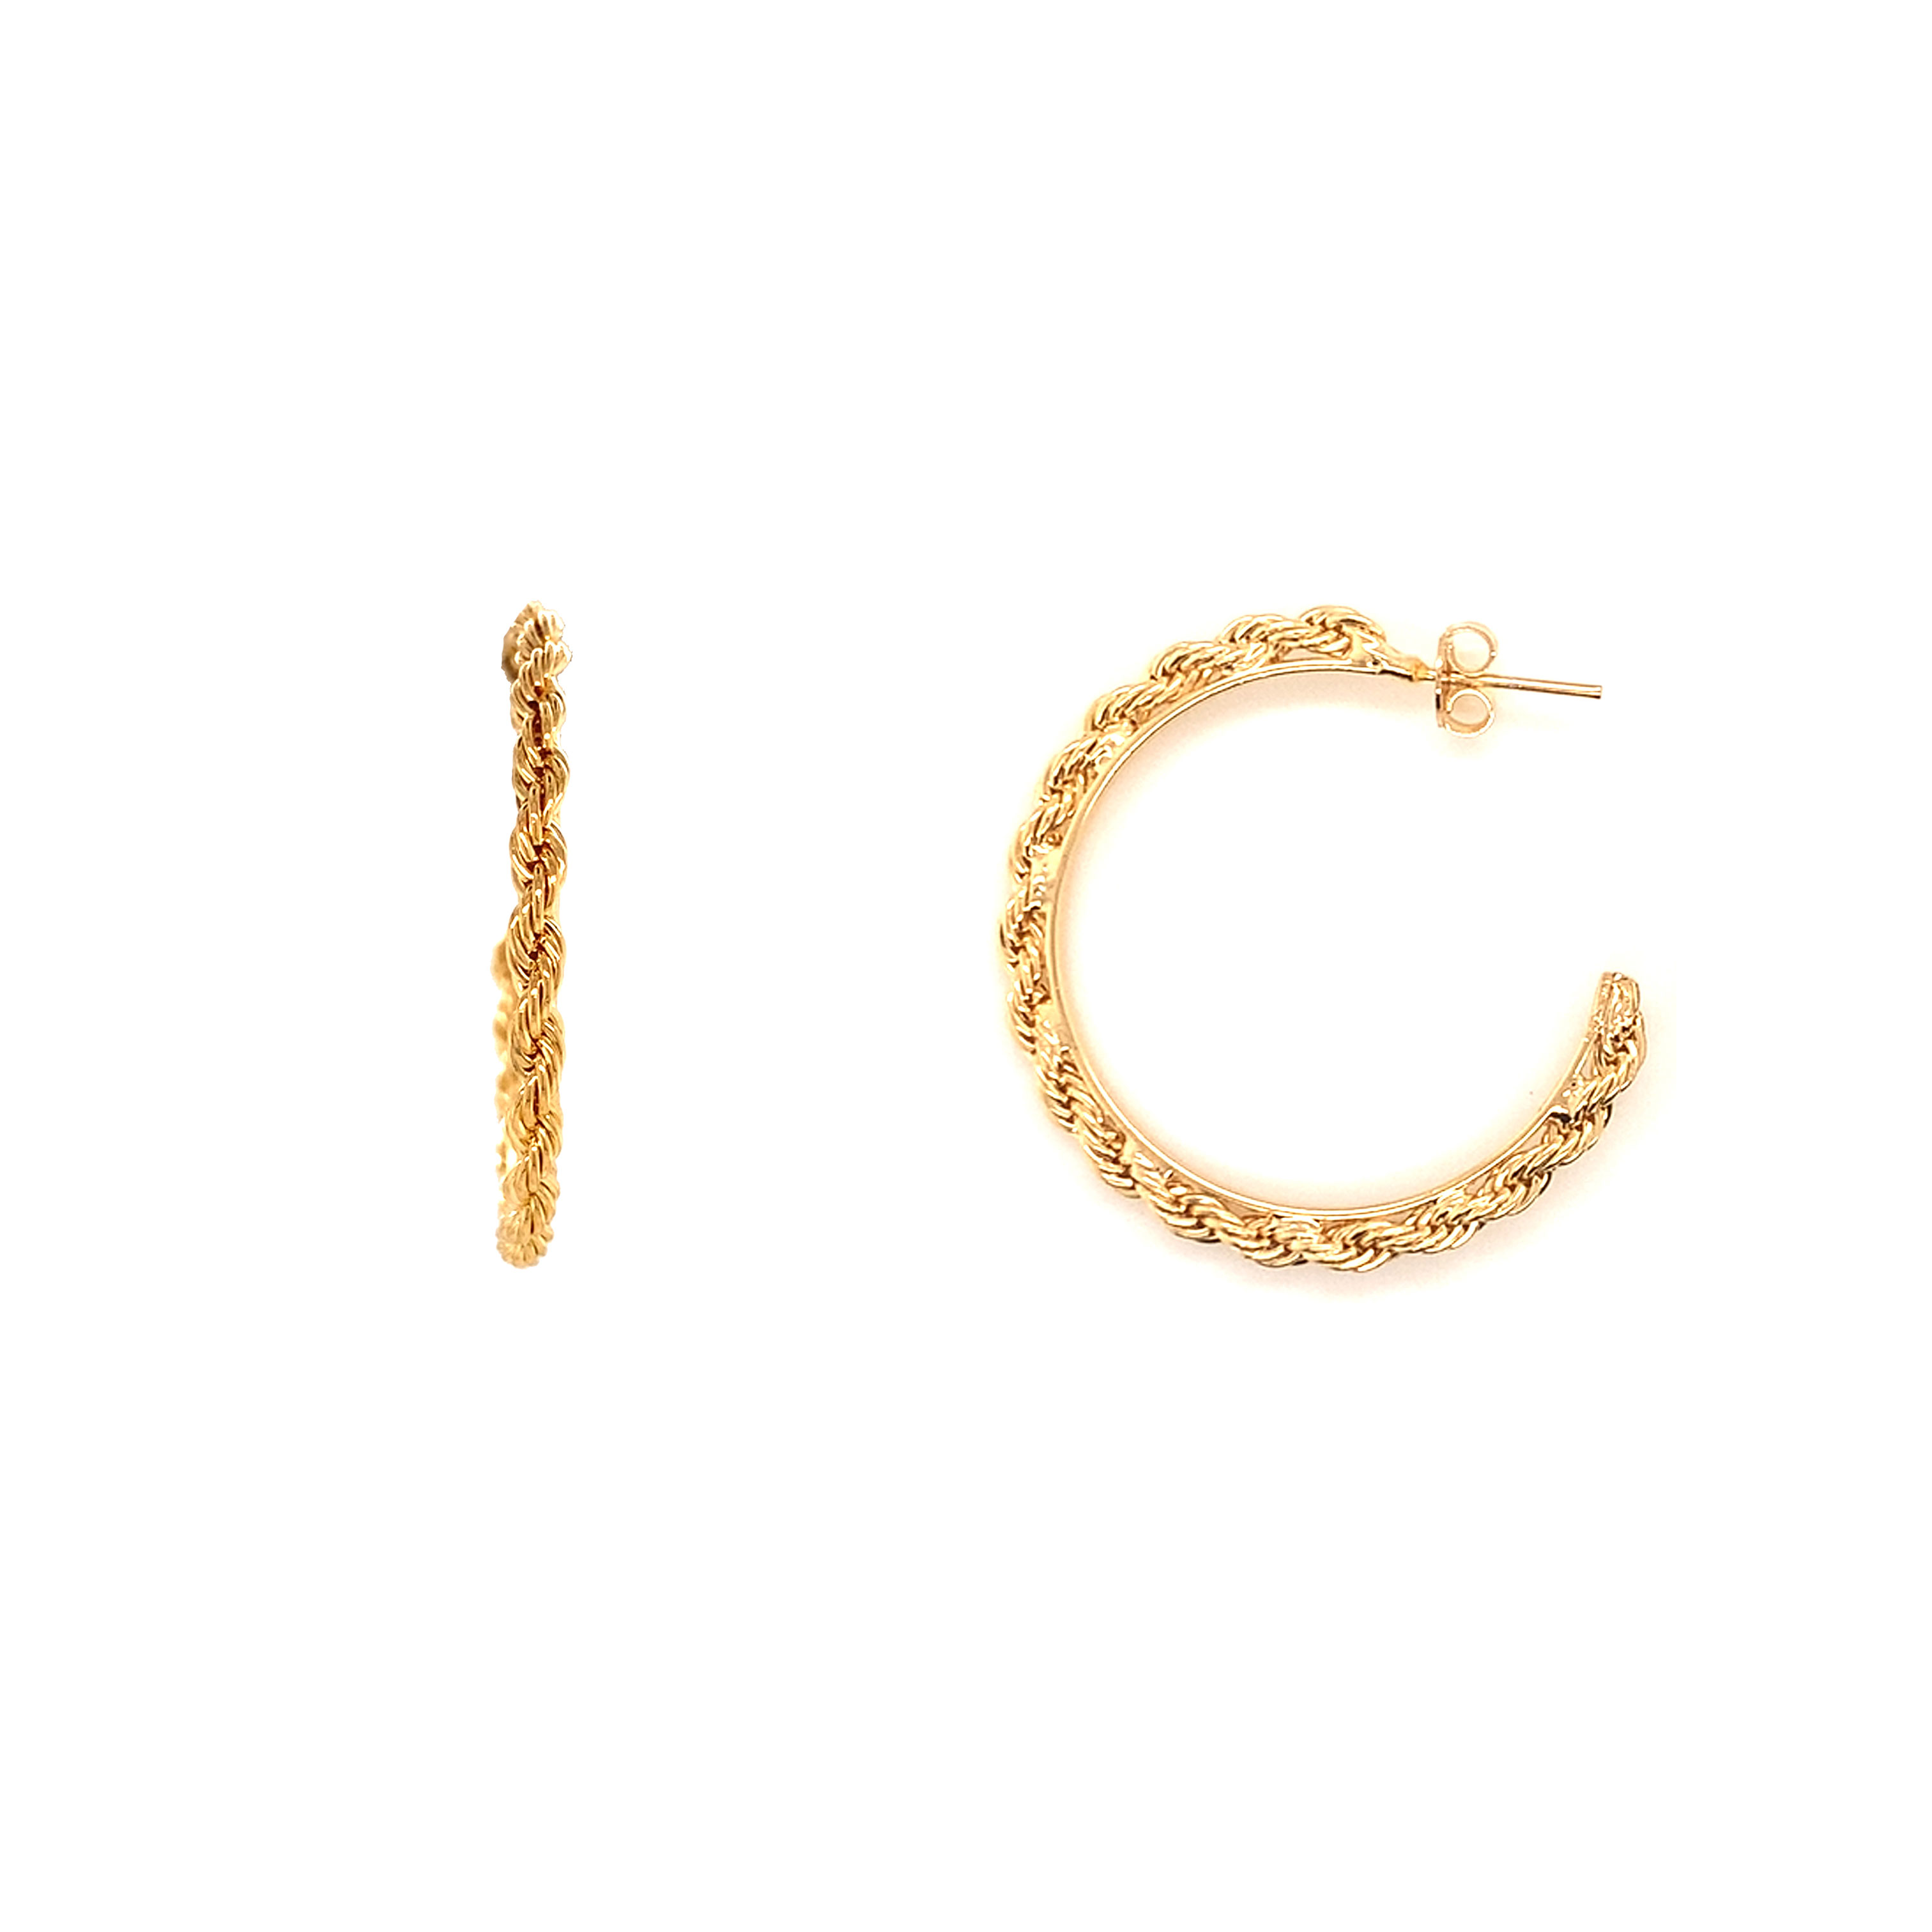 3mm x 35mm Rope Hoops - Gold Filled